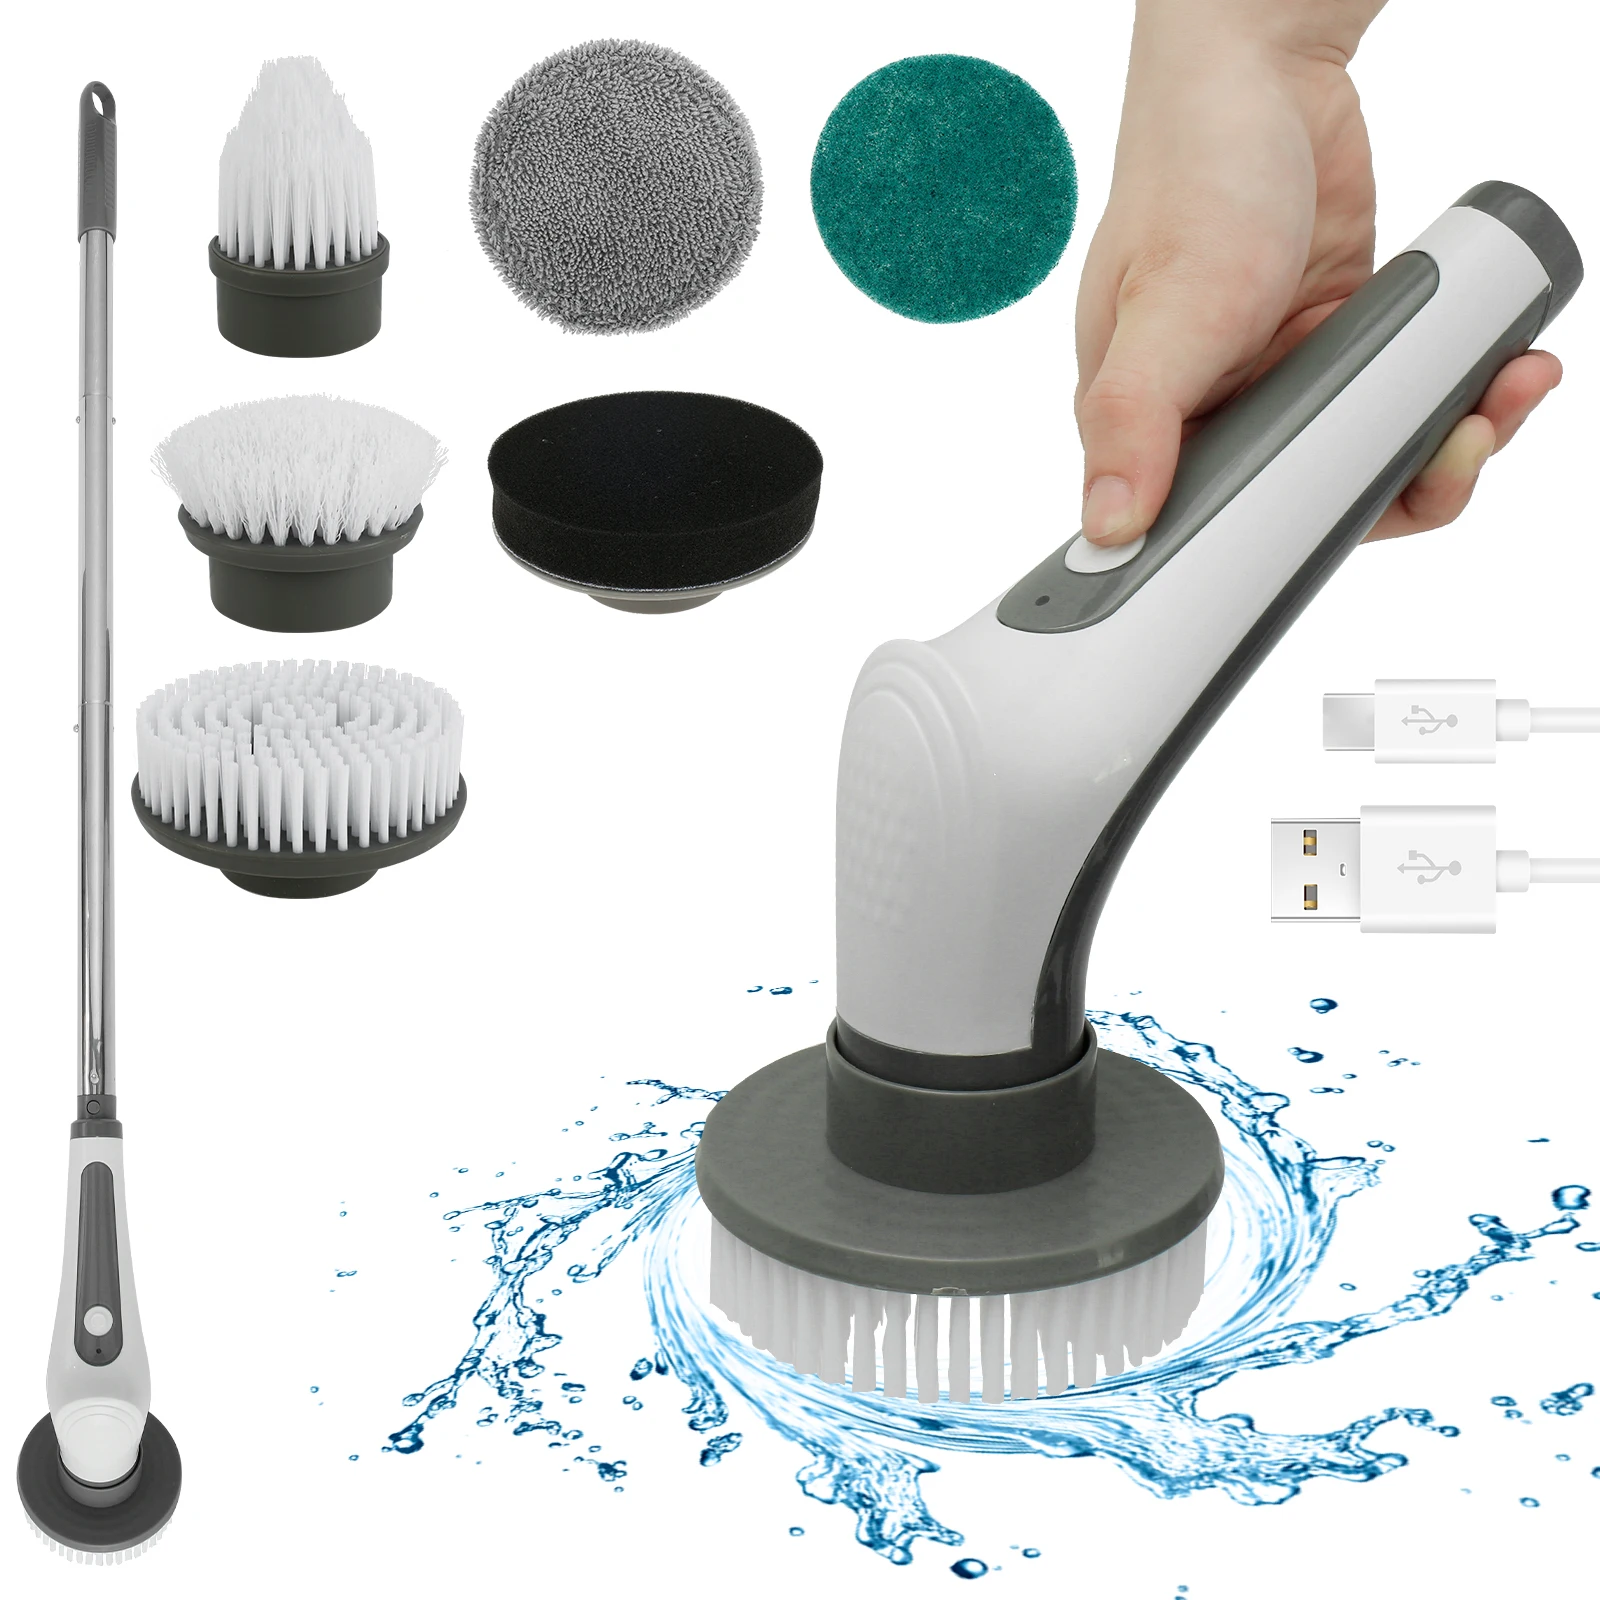 

Electric Spin Scrubber with 6 Replacement Brush Heads IPX8 Waterproof Spinning Scrubber Brush with Removable Handle Cordless